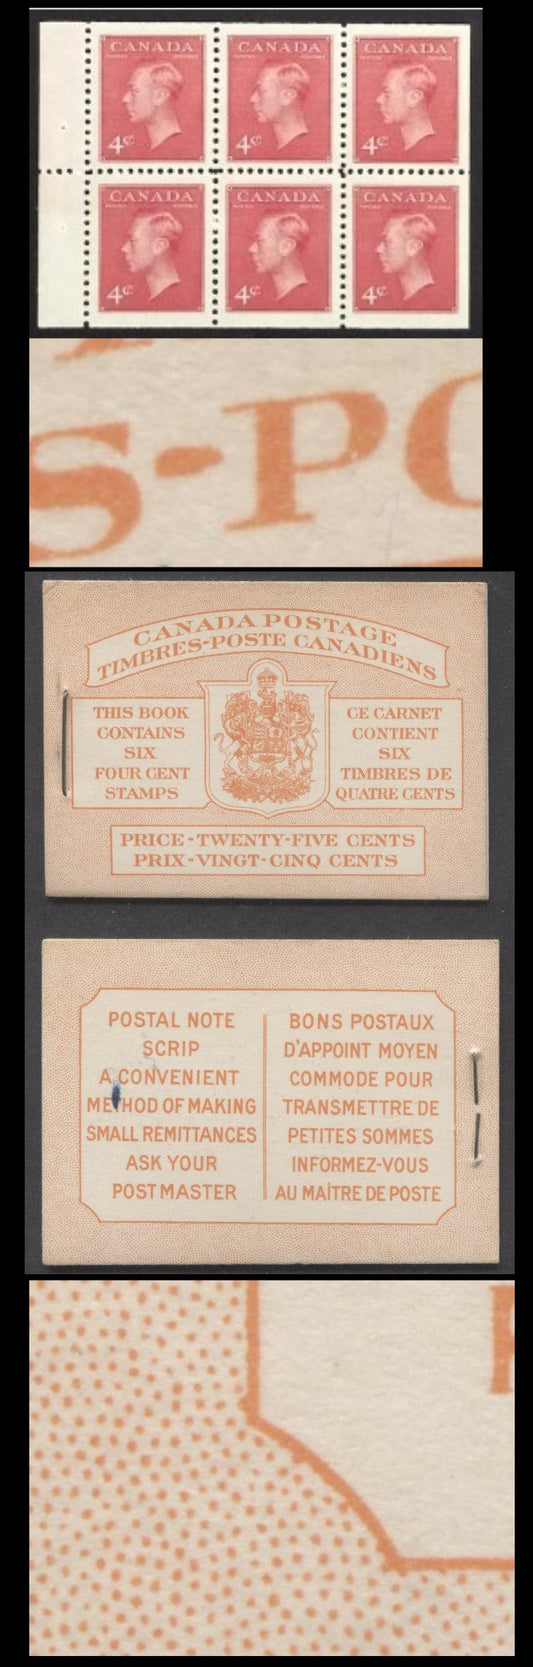 Lot 91 Canada #BK41aB 1949-1951 KGVI Issue, A Complete 25c Bilingual Booklet With 4c Dark Carmine, Pane Of 6. Front Cover IIIf, back Cover Faii, Type I Cover, 7c & 5c Rates, 'Postmaster' , 1,203,000 Issued